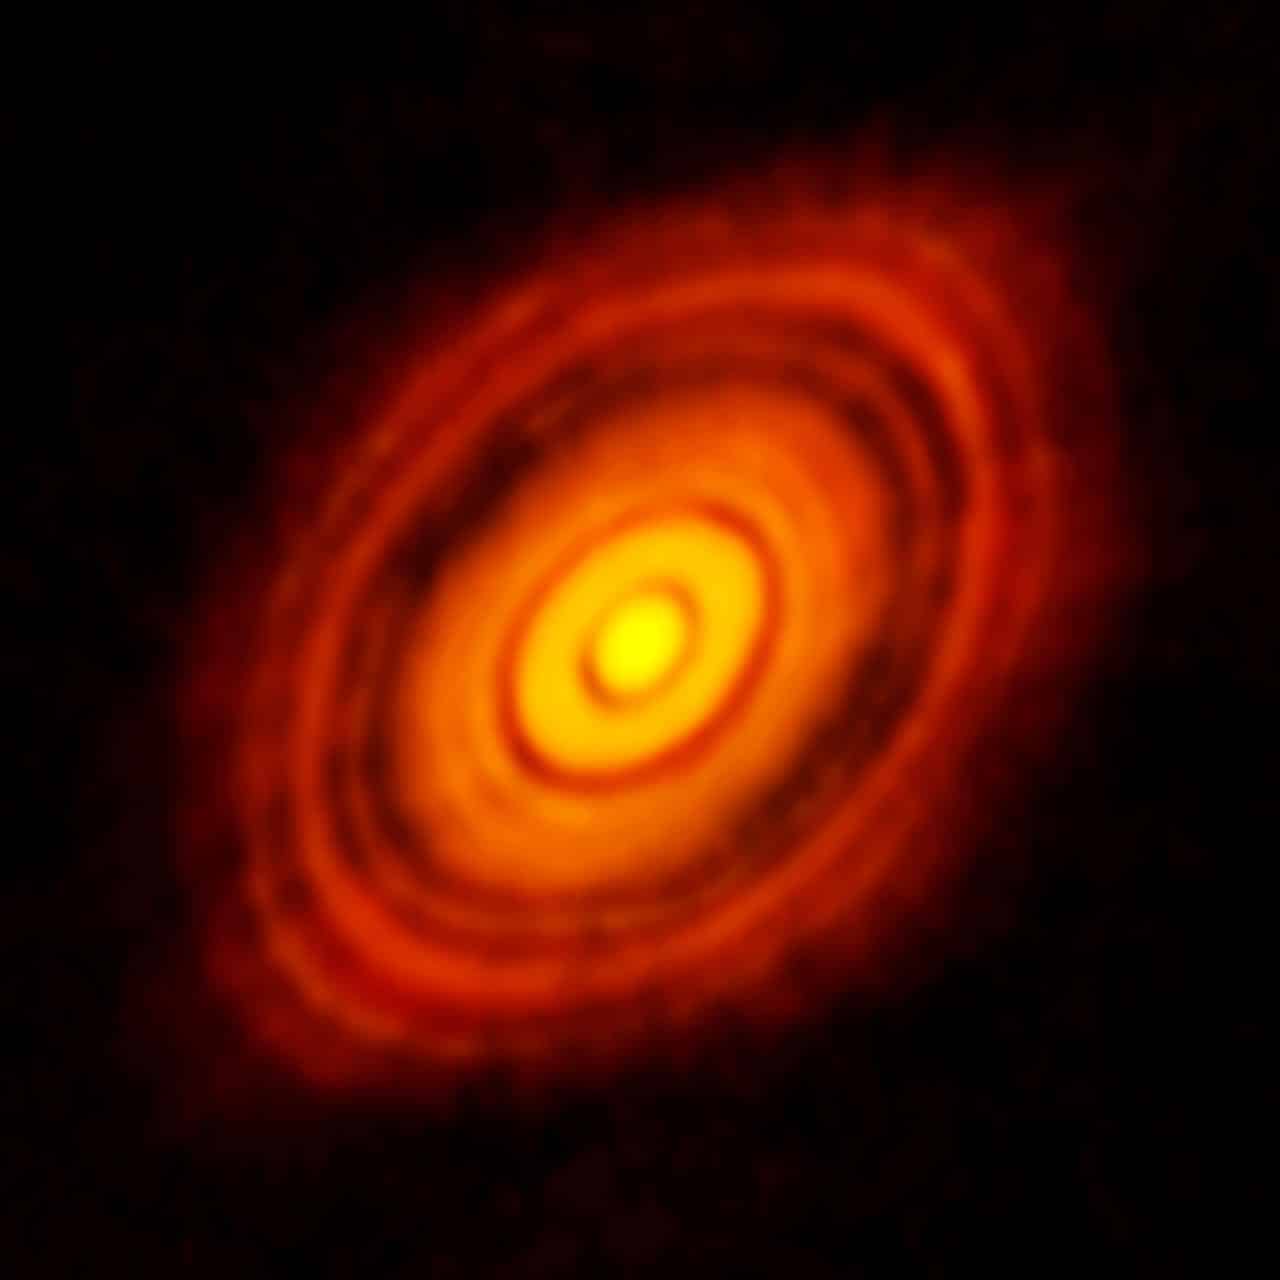 This is the sharpest image ever taken by ALMA—sharper than is routinely achieved in visible light with the NASA/ESA Hubble Space Telescope. It shows the protoplanetary disk surrounding the young star HL Tauri. These new ALMA observations reveal Substructures within the disc that have never been seen before and even show the possible locations of planets forming in the dark spots within the system Credit: ALMA (ESO/NAOJ/NRAO)